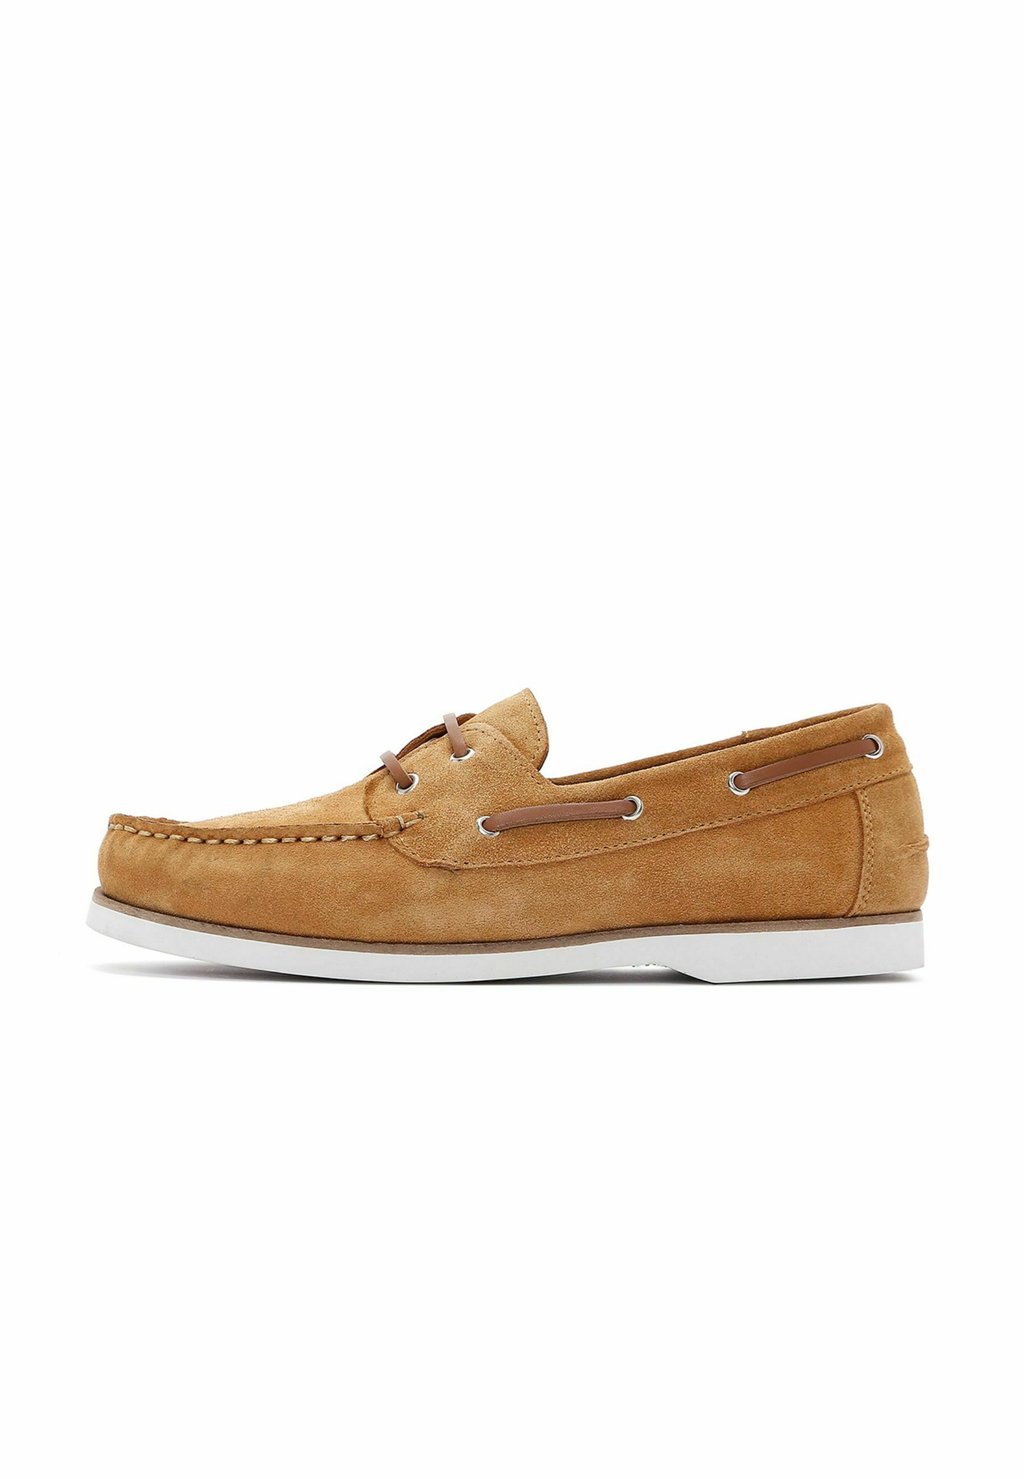 ba0015 laced serrated tan white sole suede sports men shoes Топсайдеры SUEDE BOAT SHOES Derimod, цвет Tan